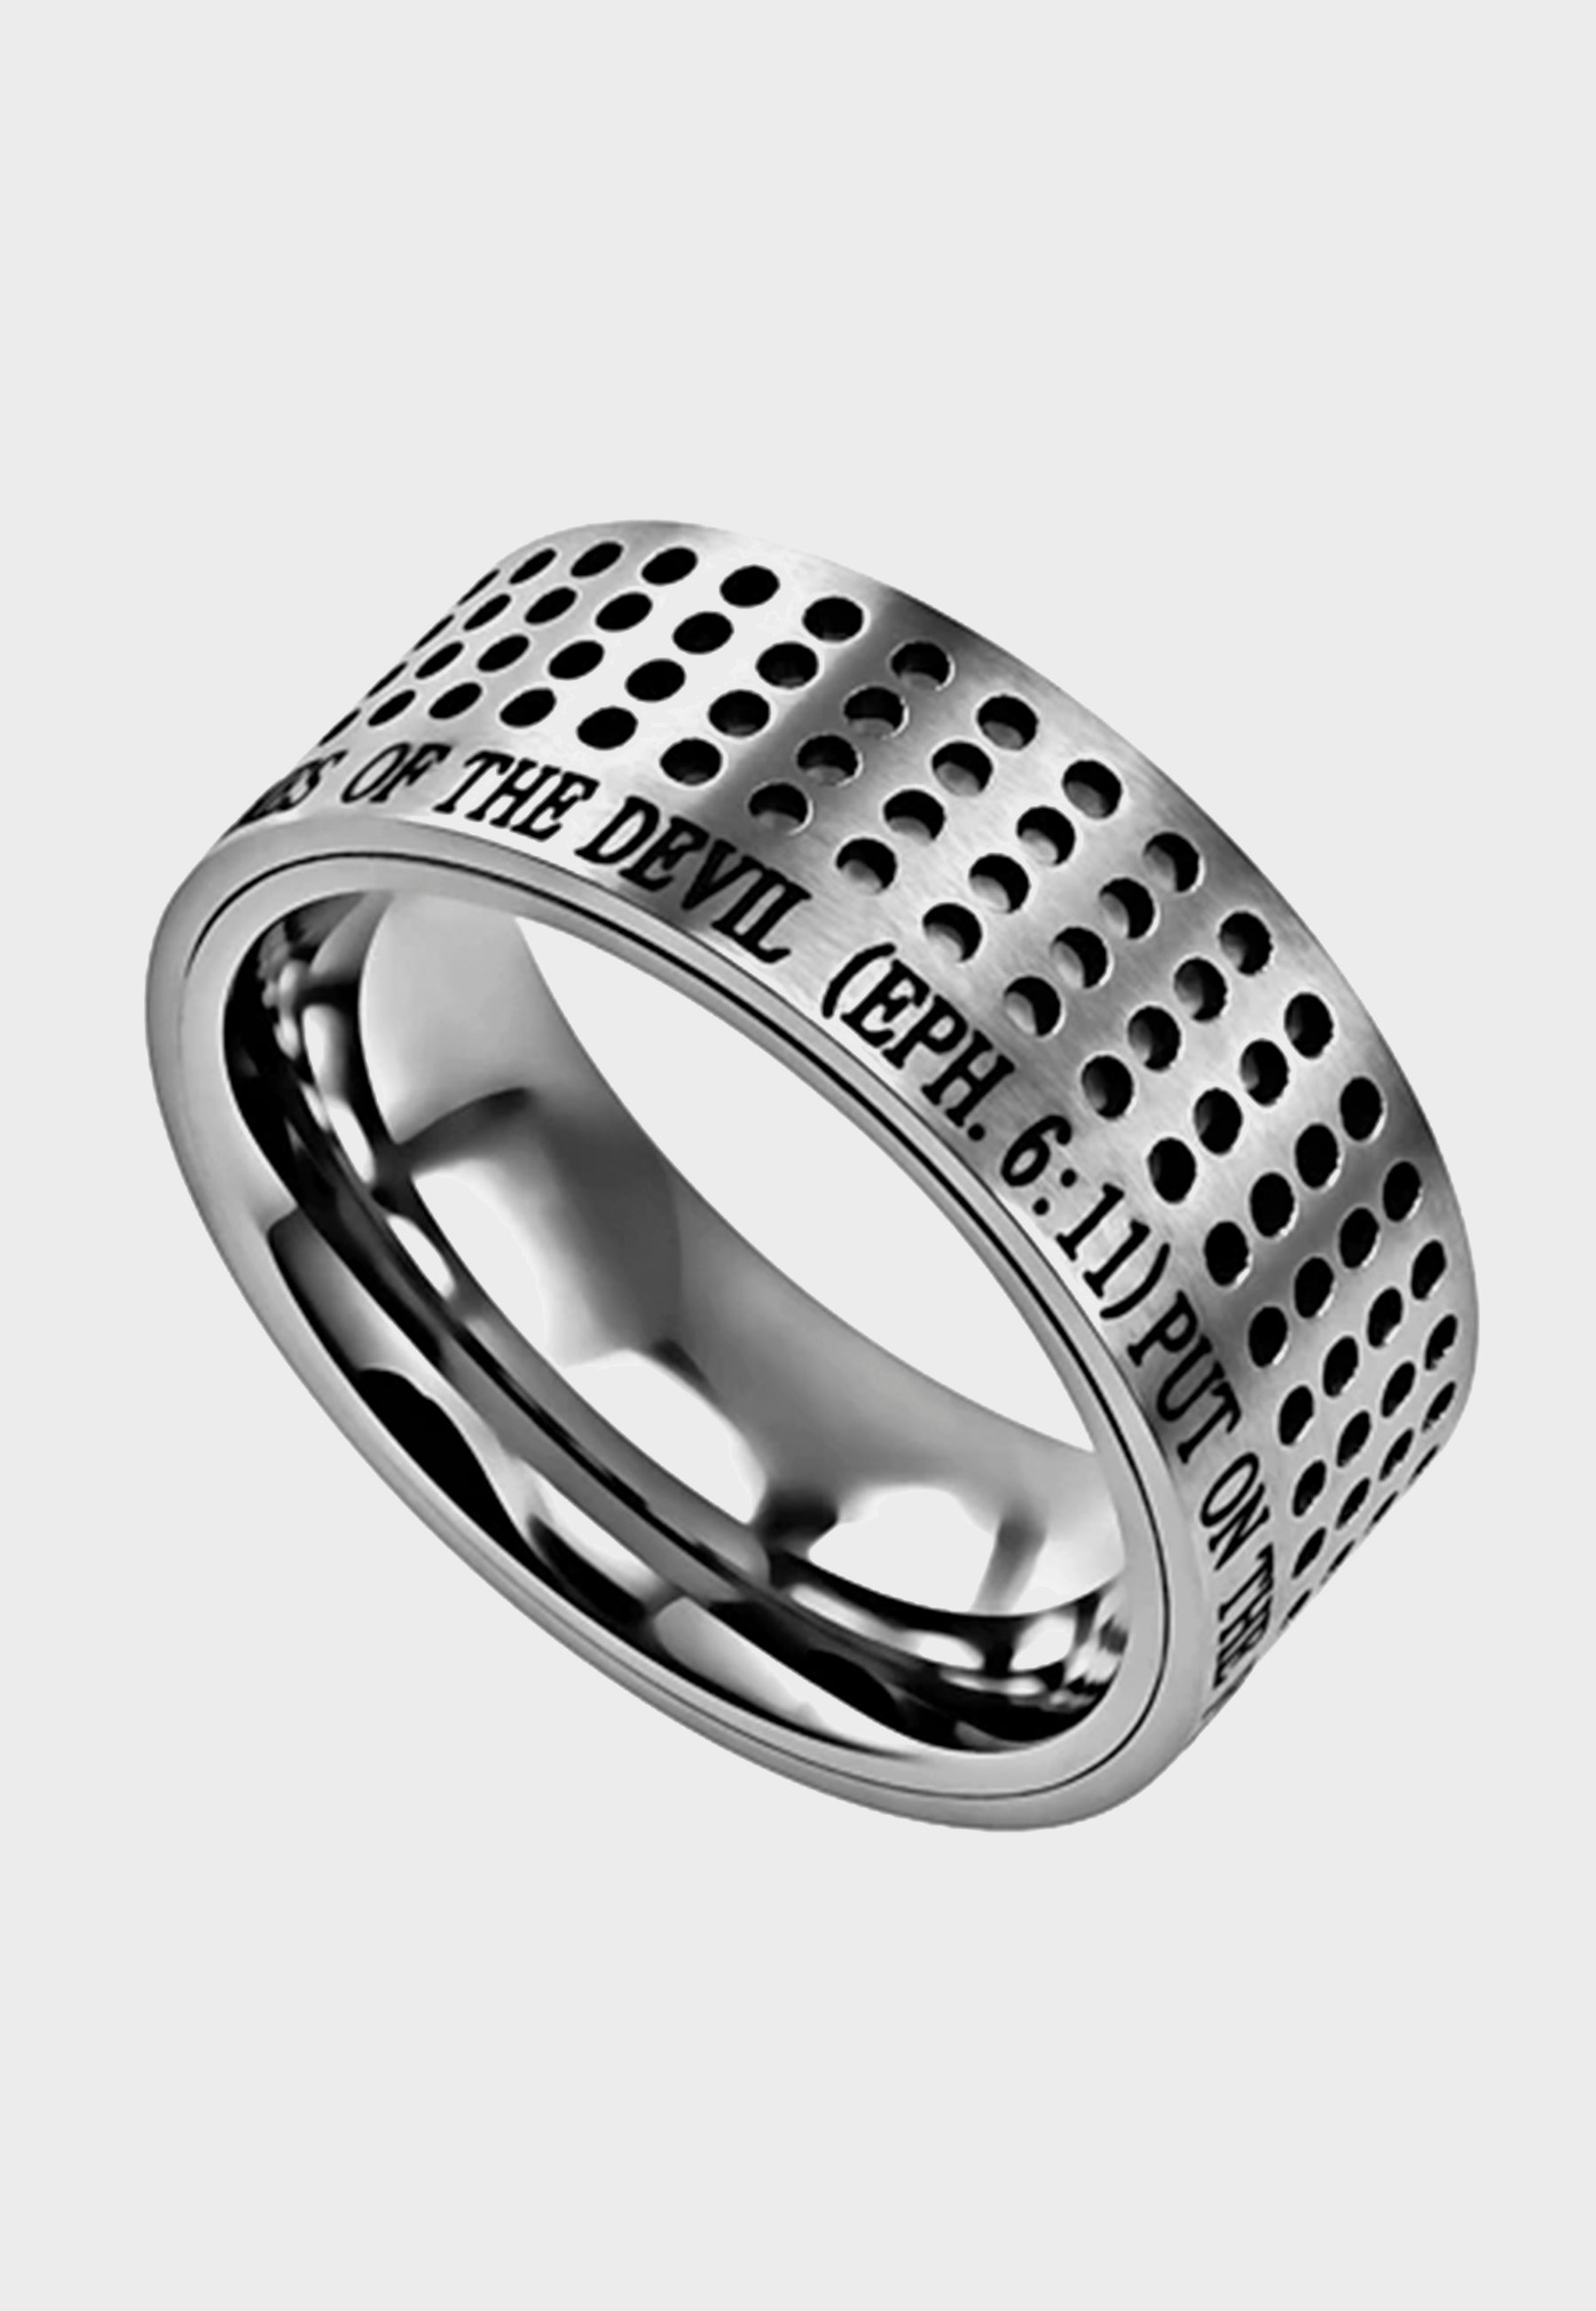 Armor of God mens slotted ring with inscription